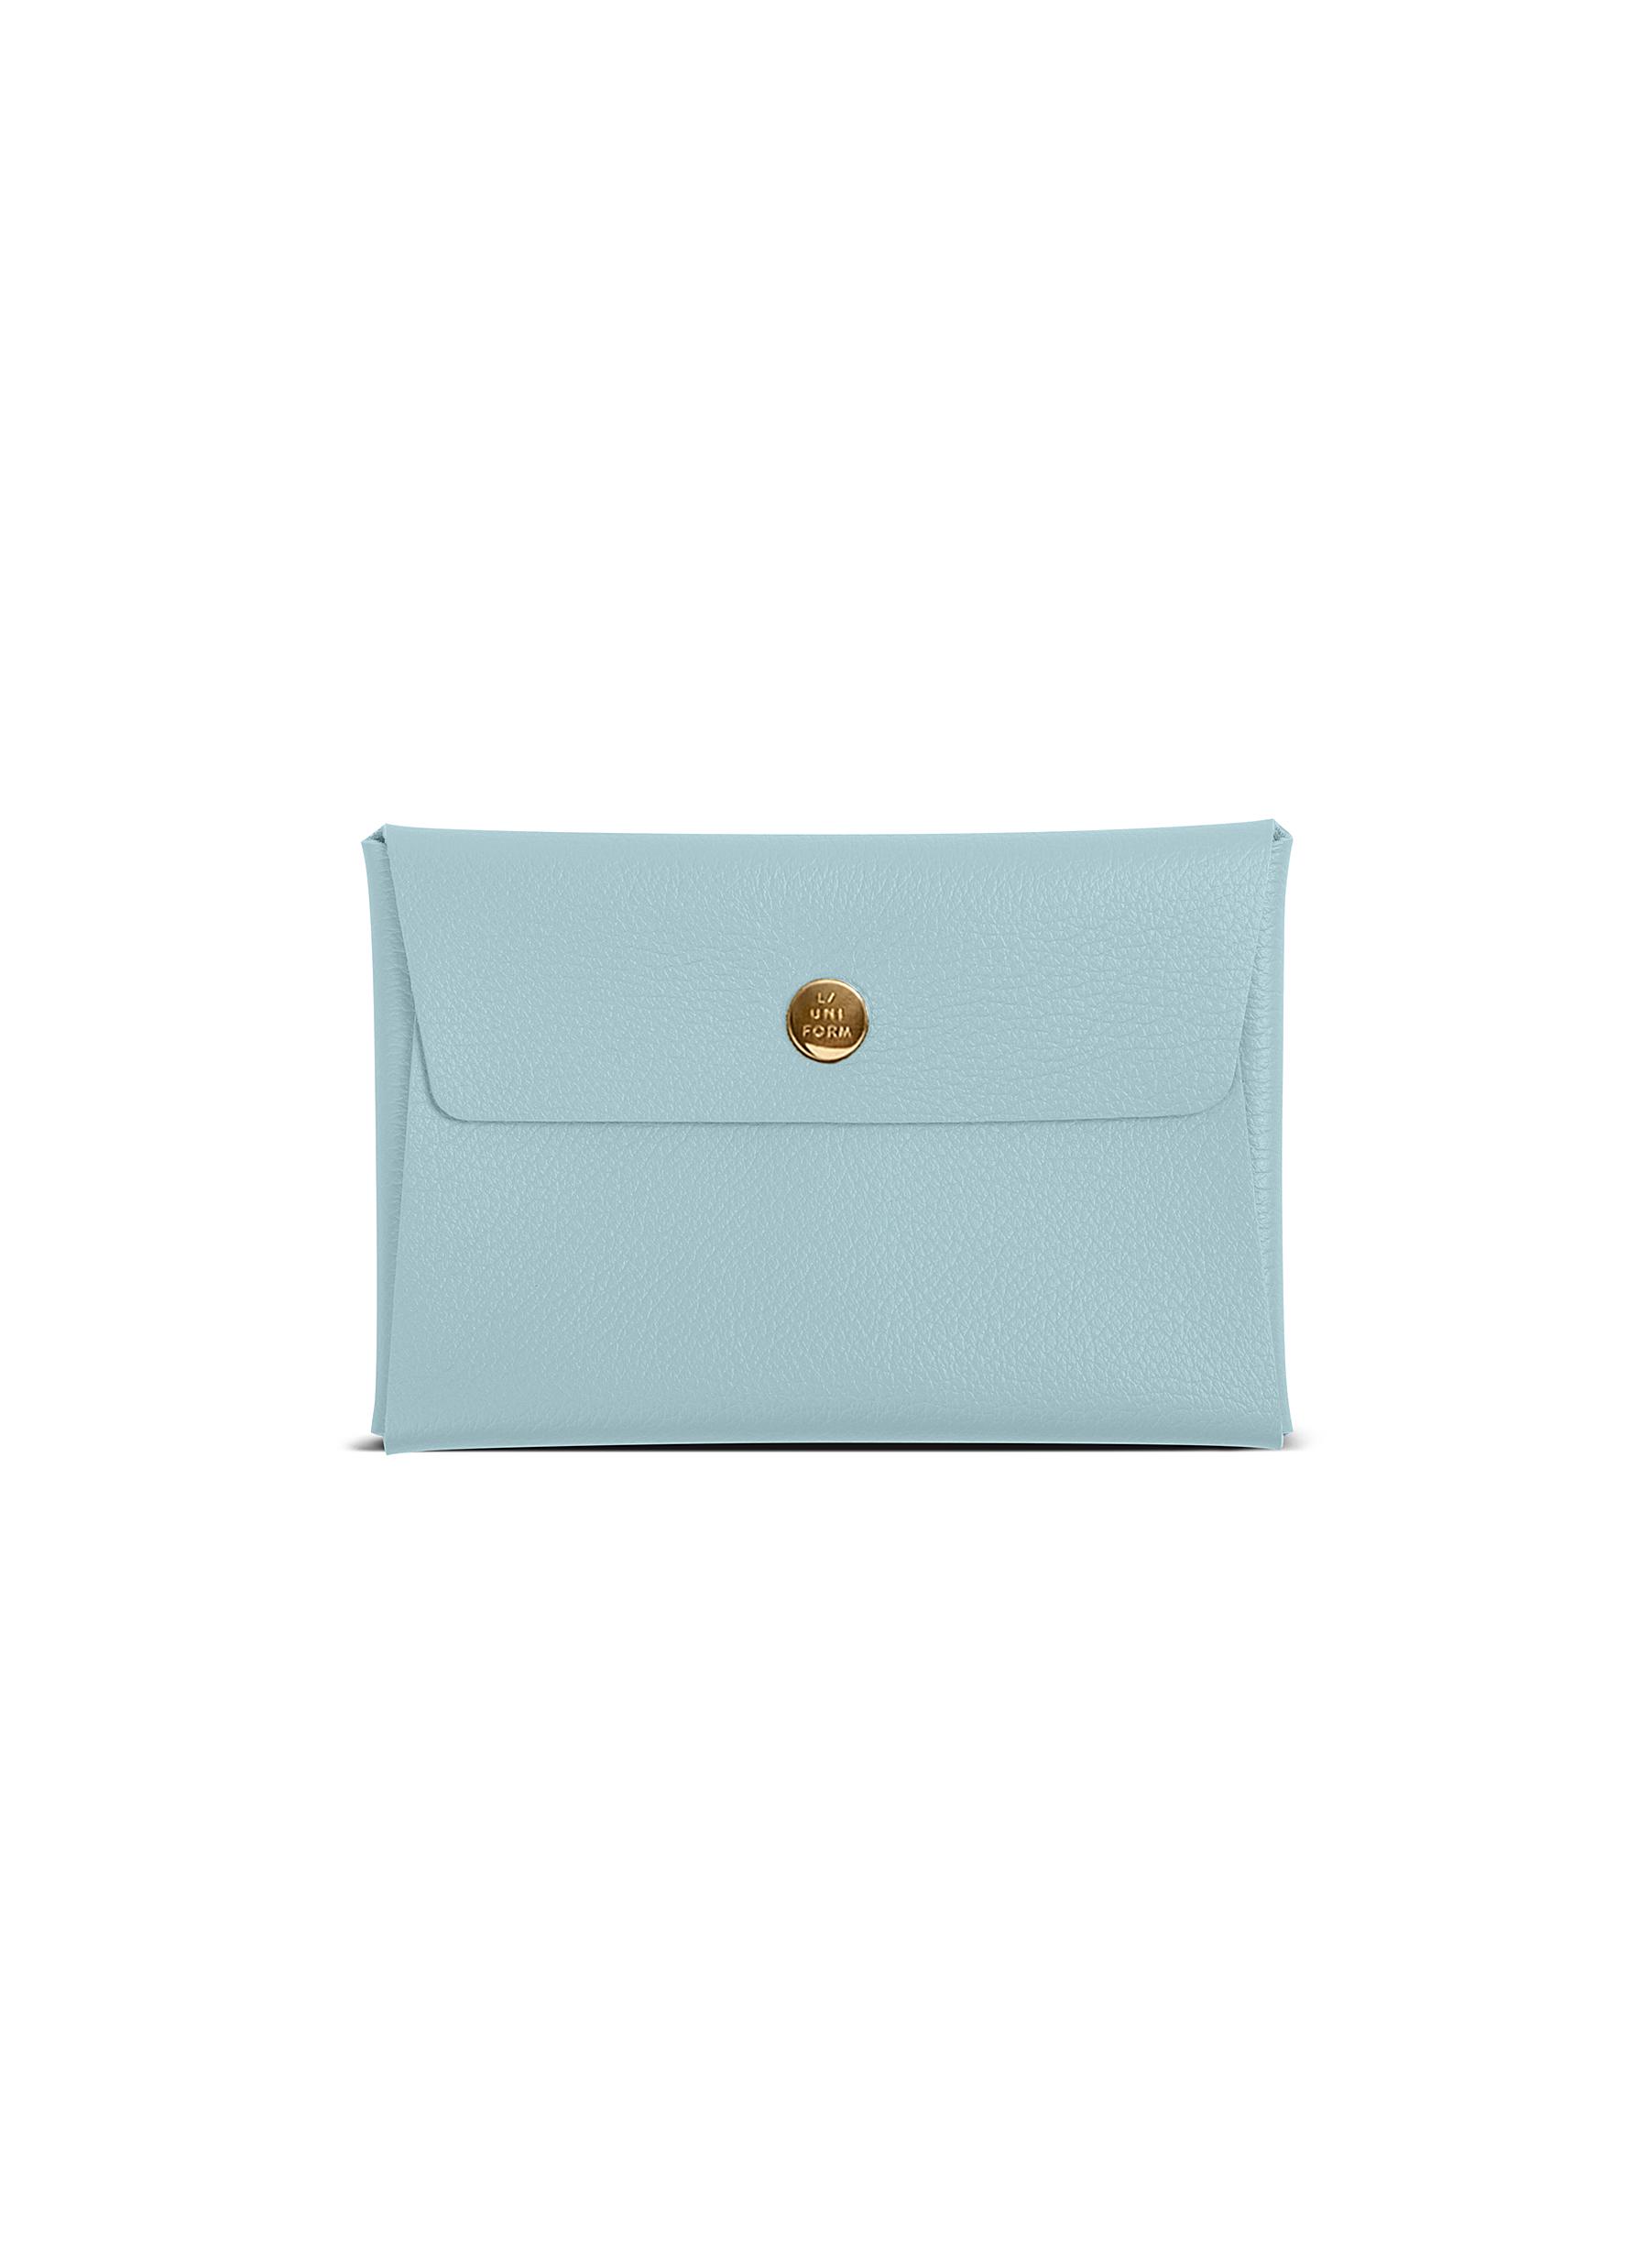 Small Leather Envelope N°81